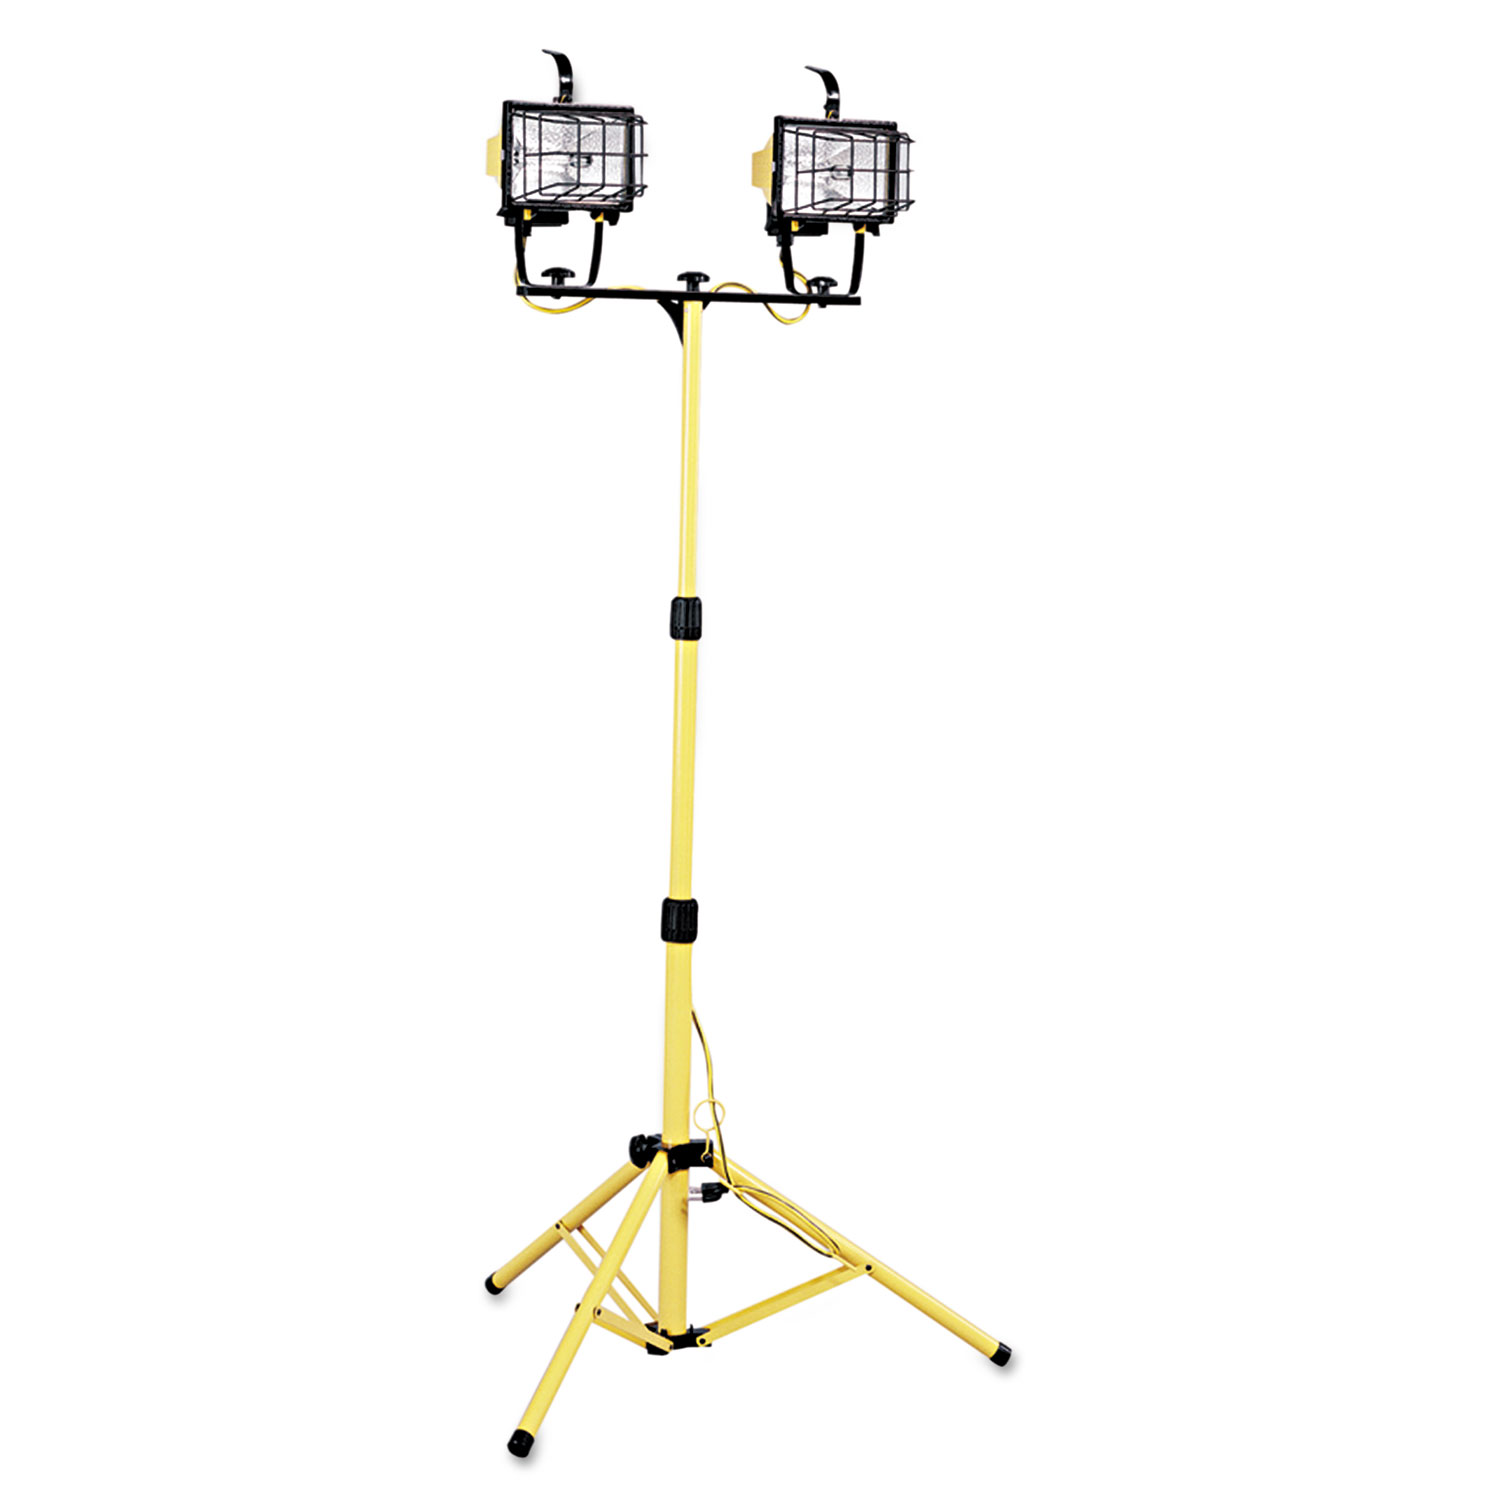 Luma-Site Dual Halogen Work Light With Tripod, Jointed, Yellow